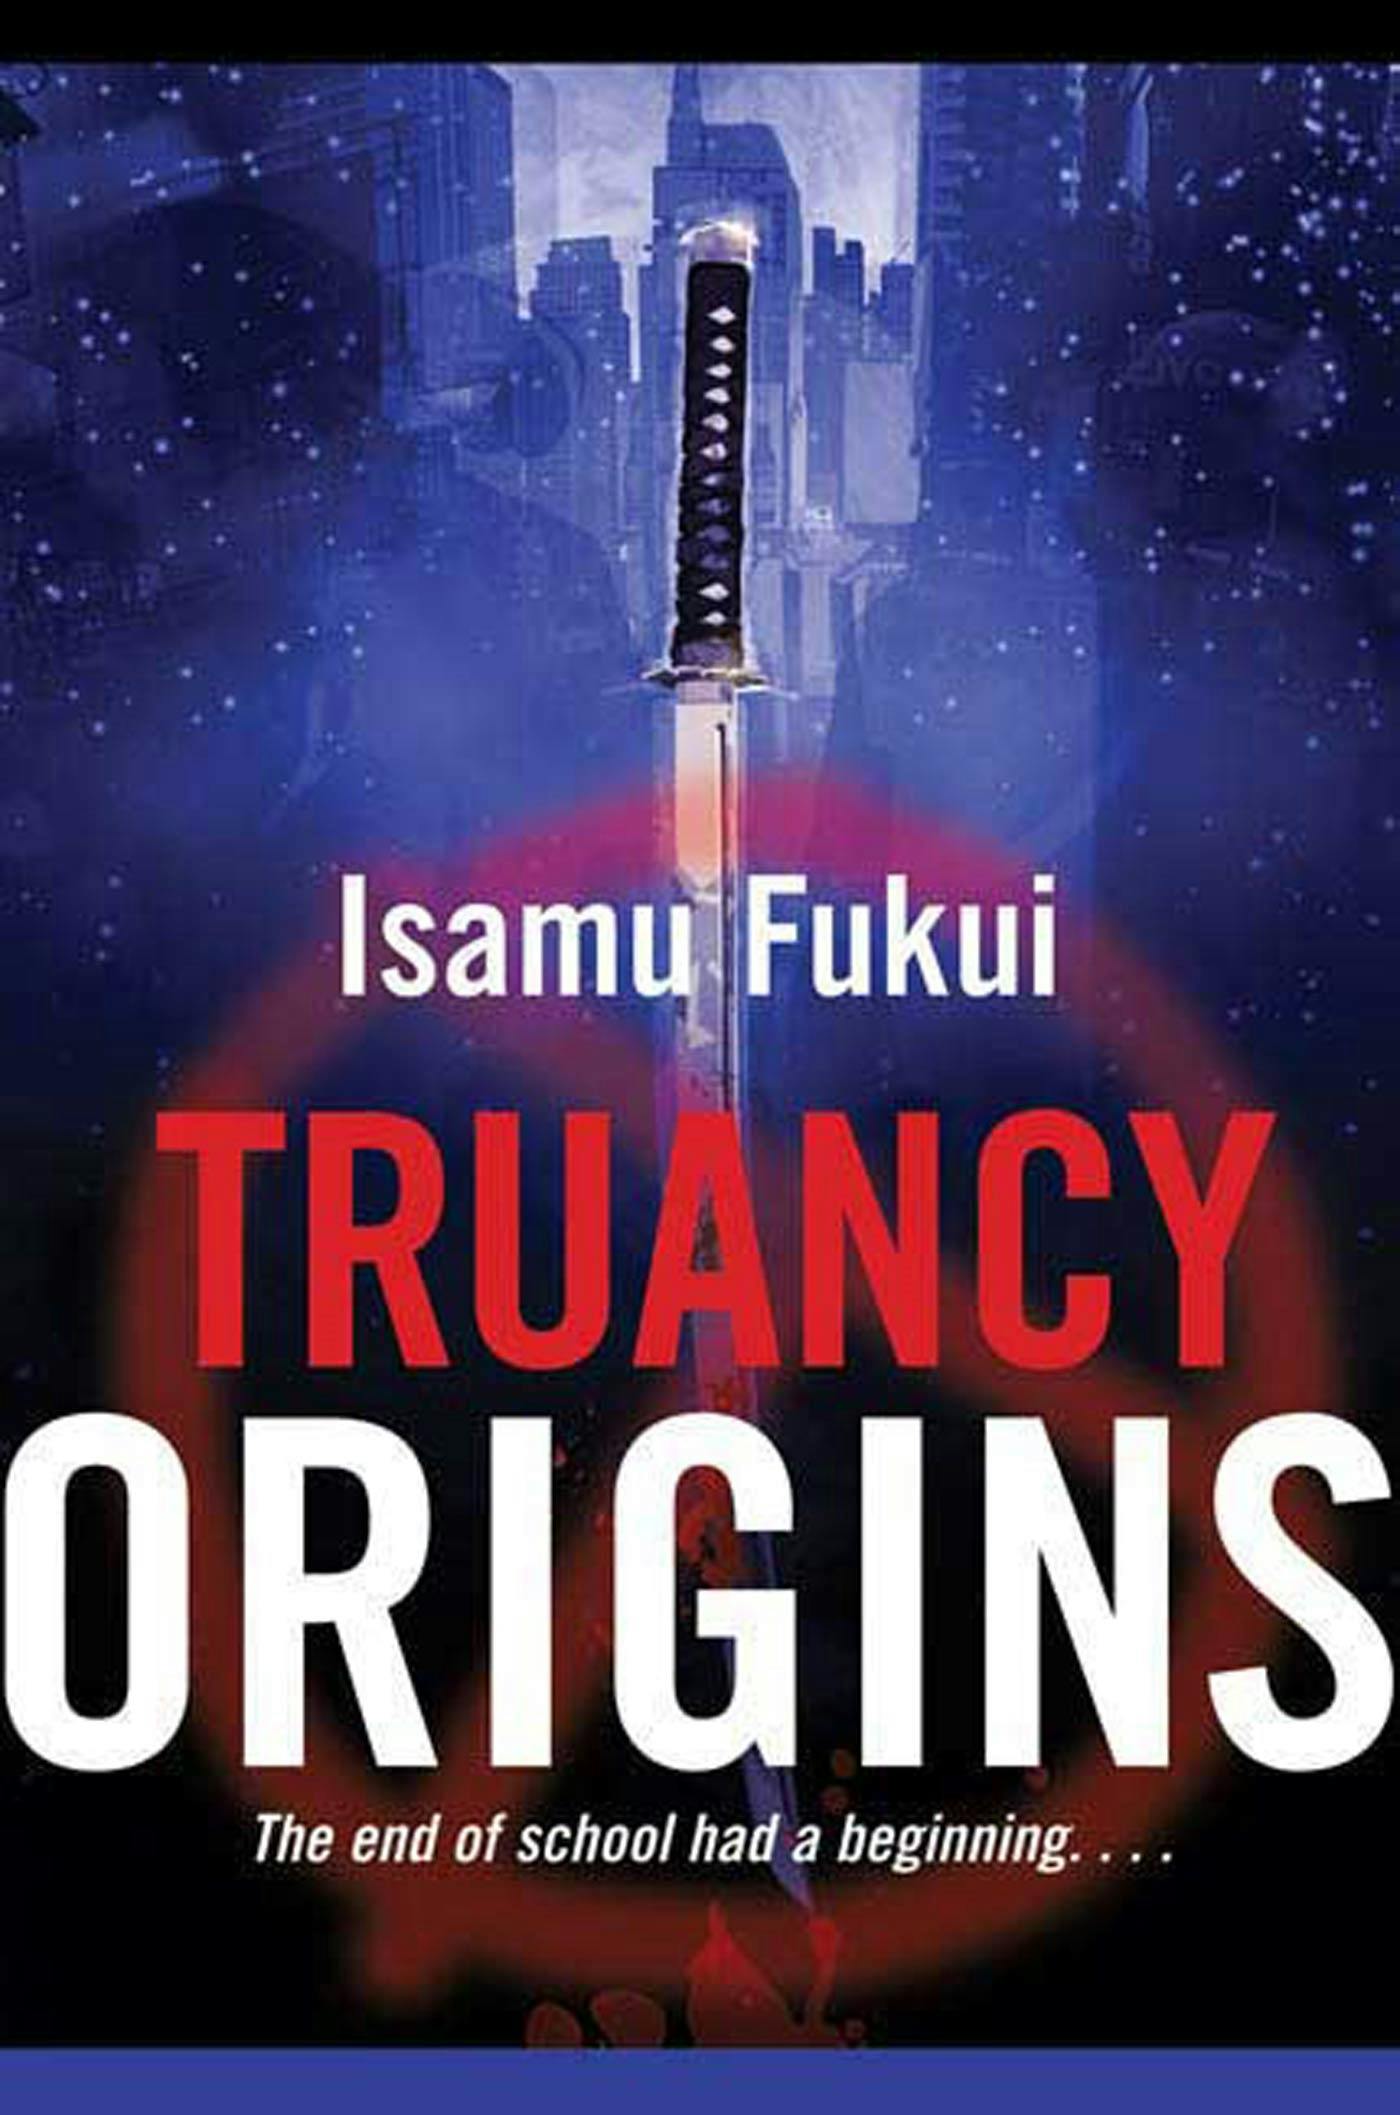 Cover for the book titled as: Truancy Origins